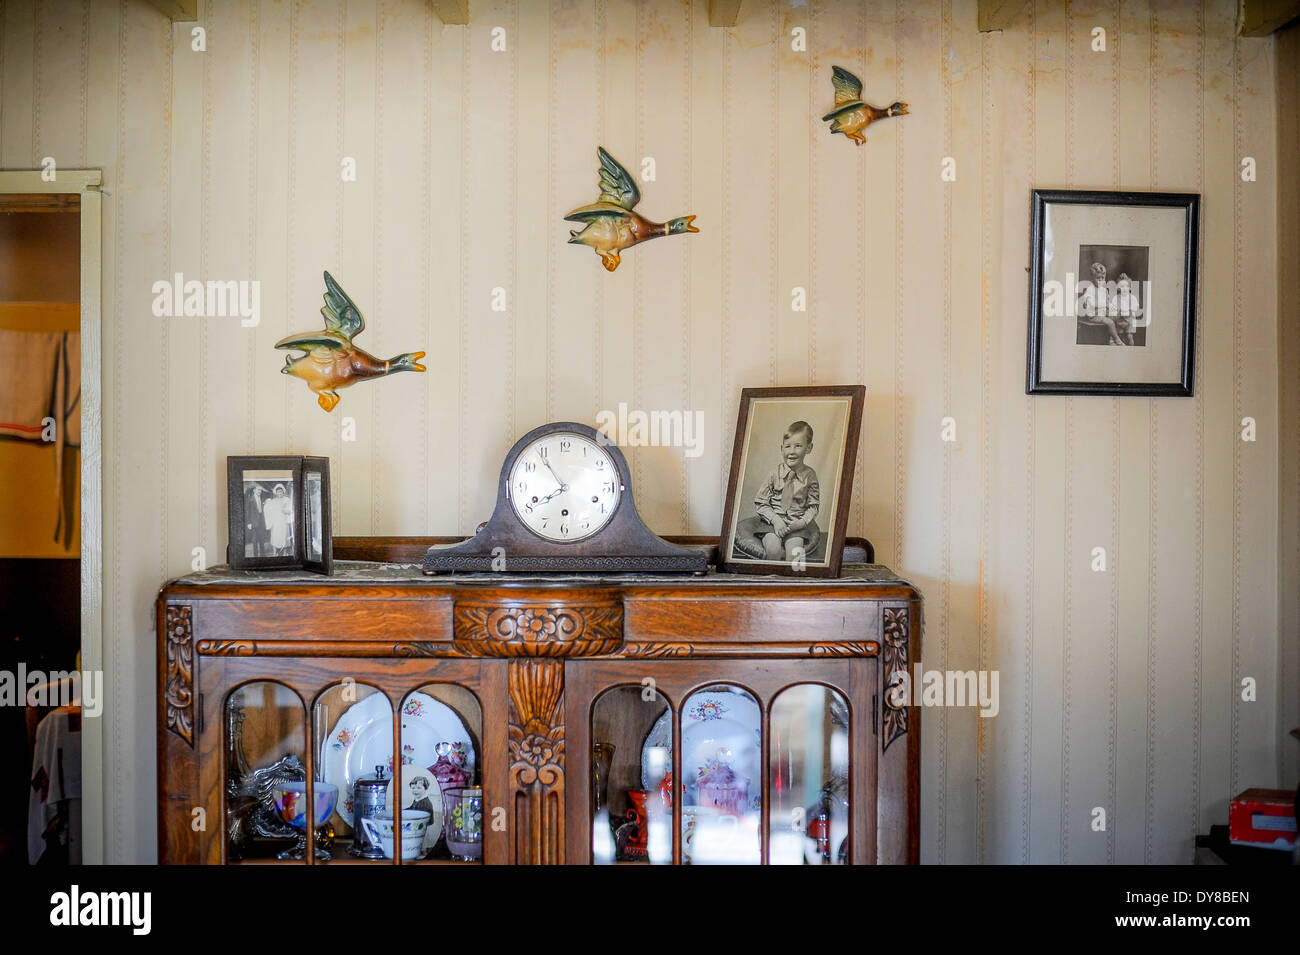 Flying ducks on vintage wallpaper in a second world war living room. Old sideboard, clock and framed photographs Stock Photo